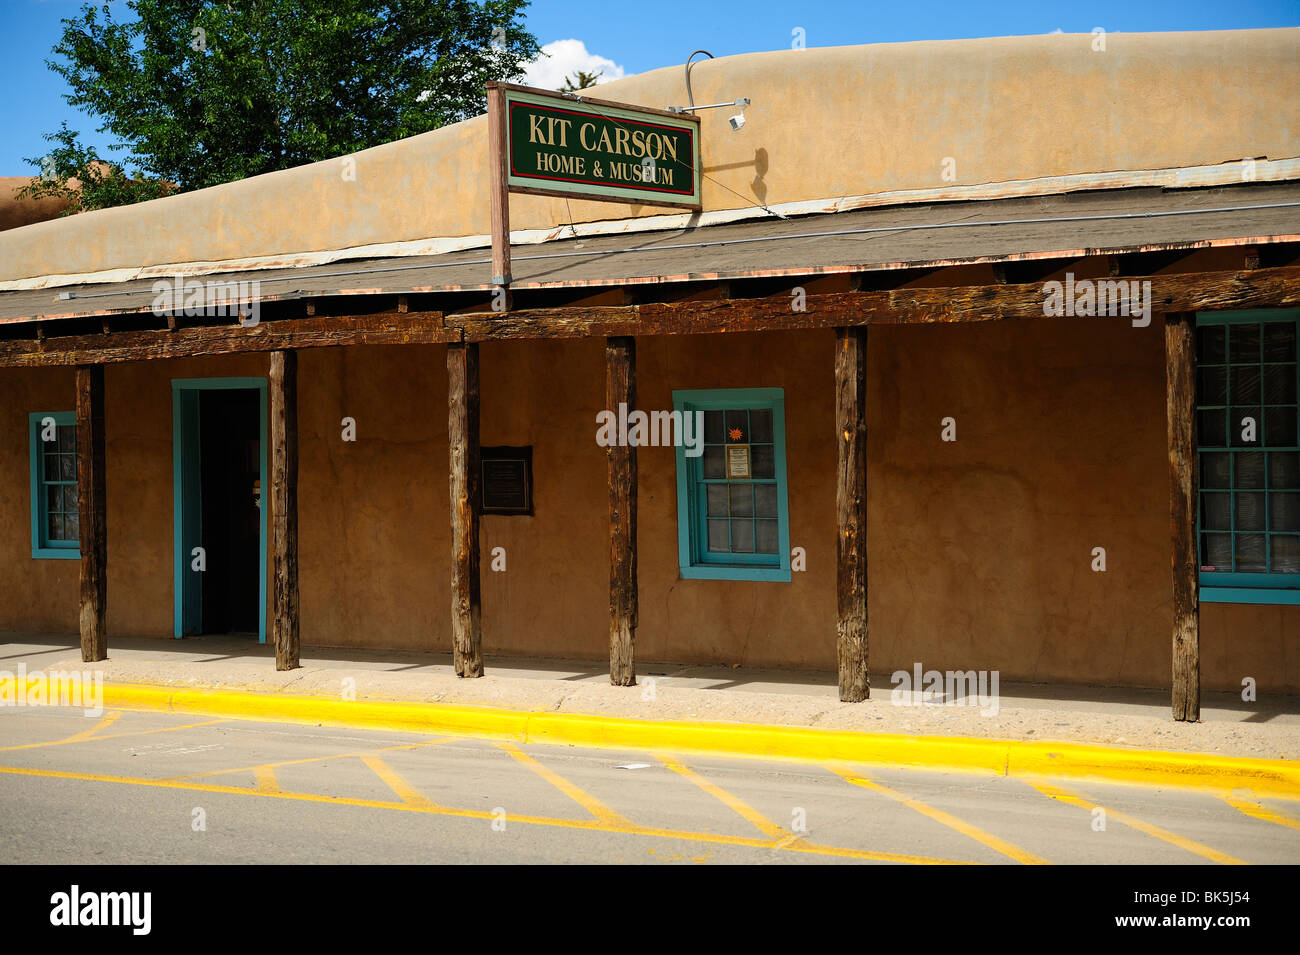 Kit Carson museum in Taos city, New Mexico. Stock Photo